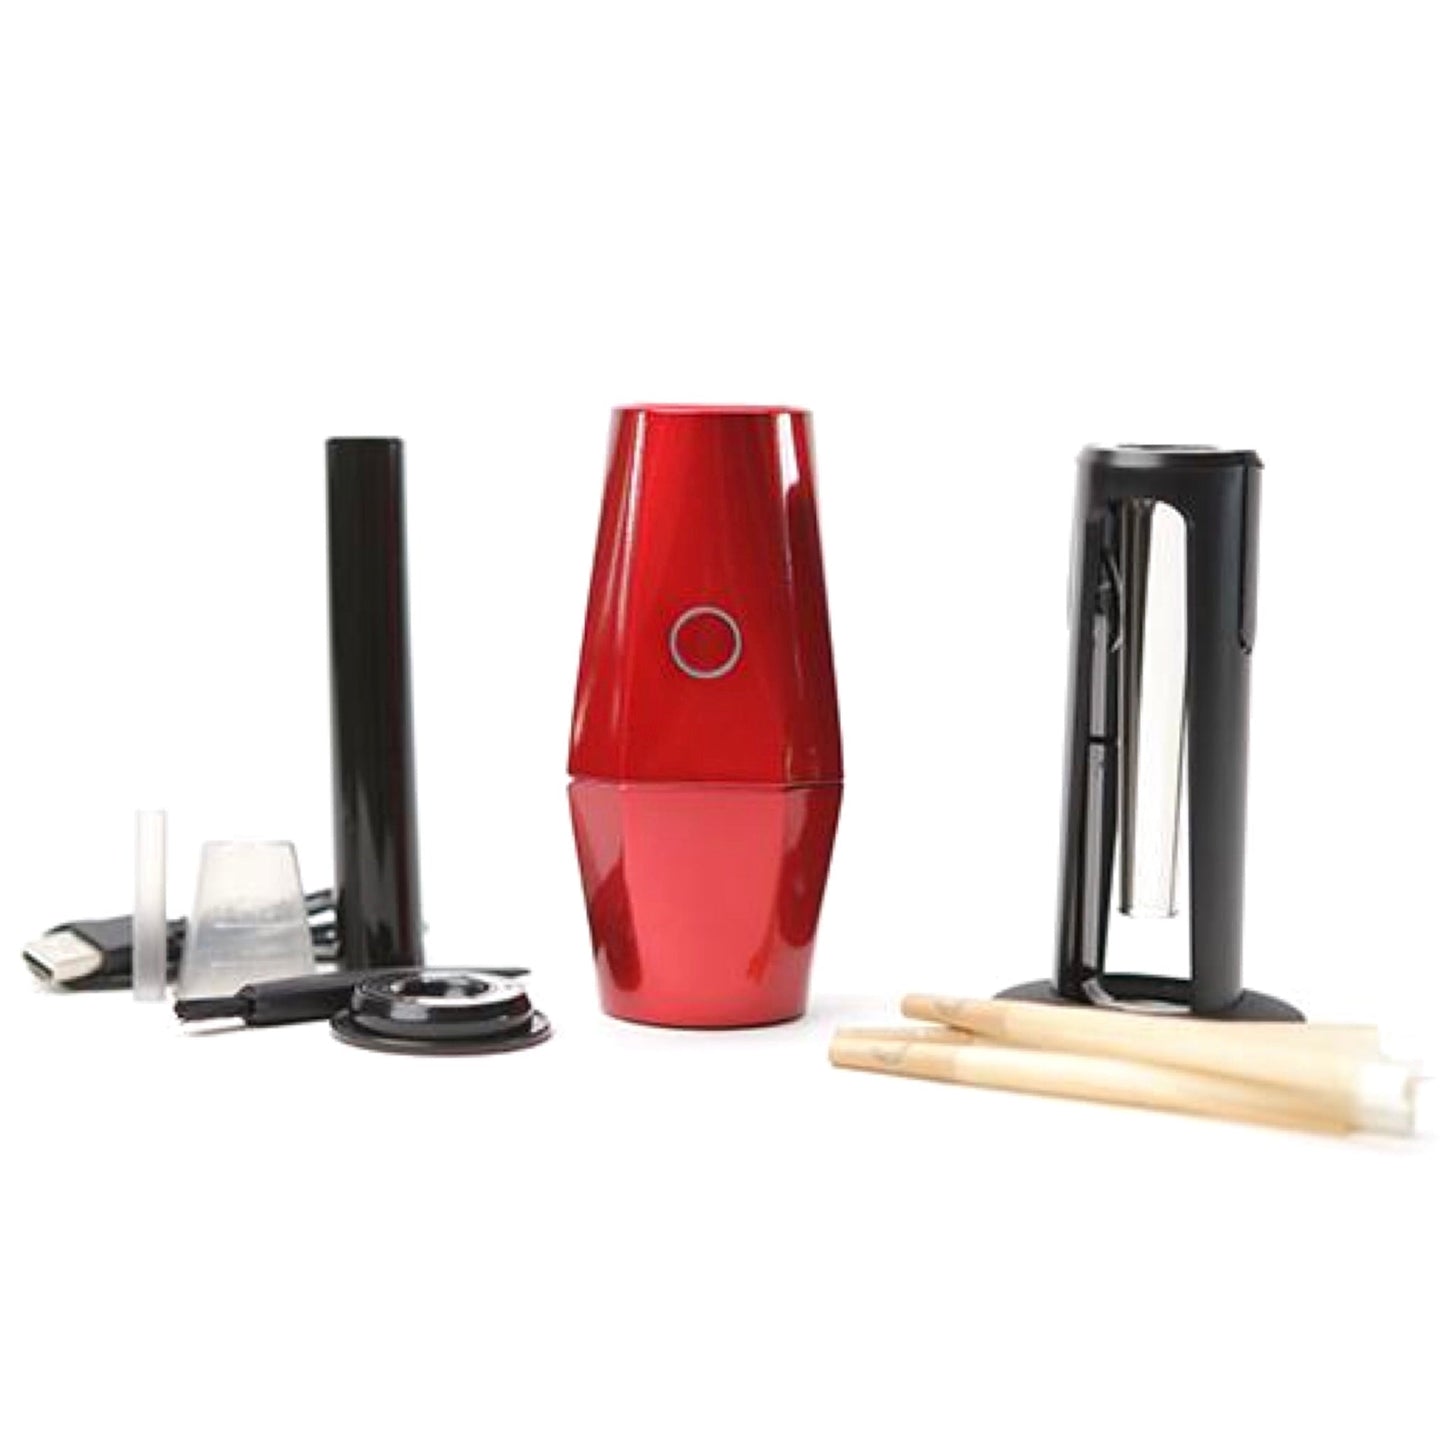 banana bros. Red OTTO Electric Grinder & Auto Joint Roller by banana bros. | Mission Dispensary